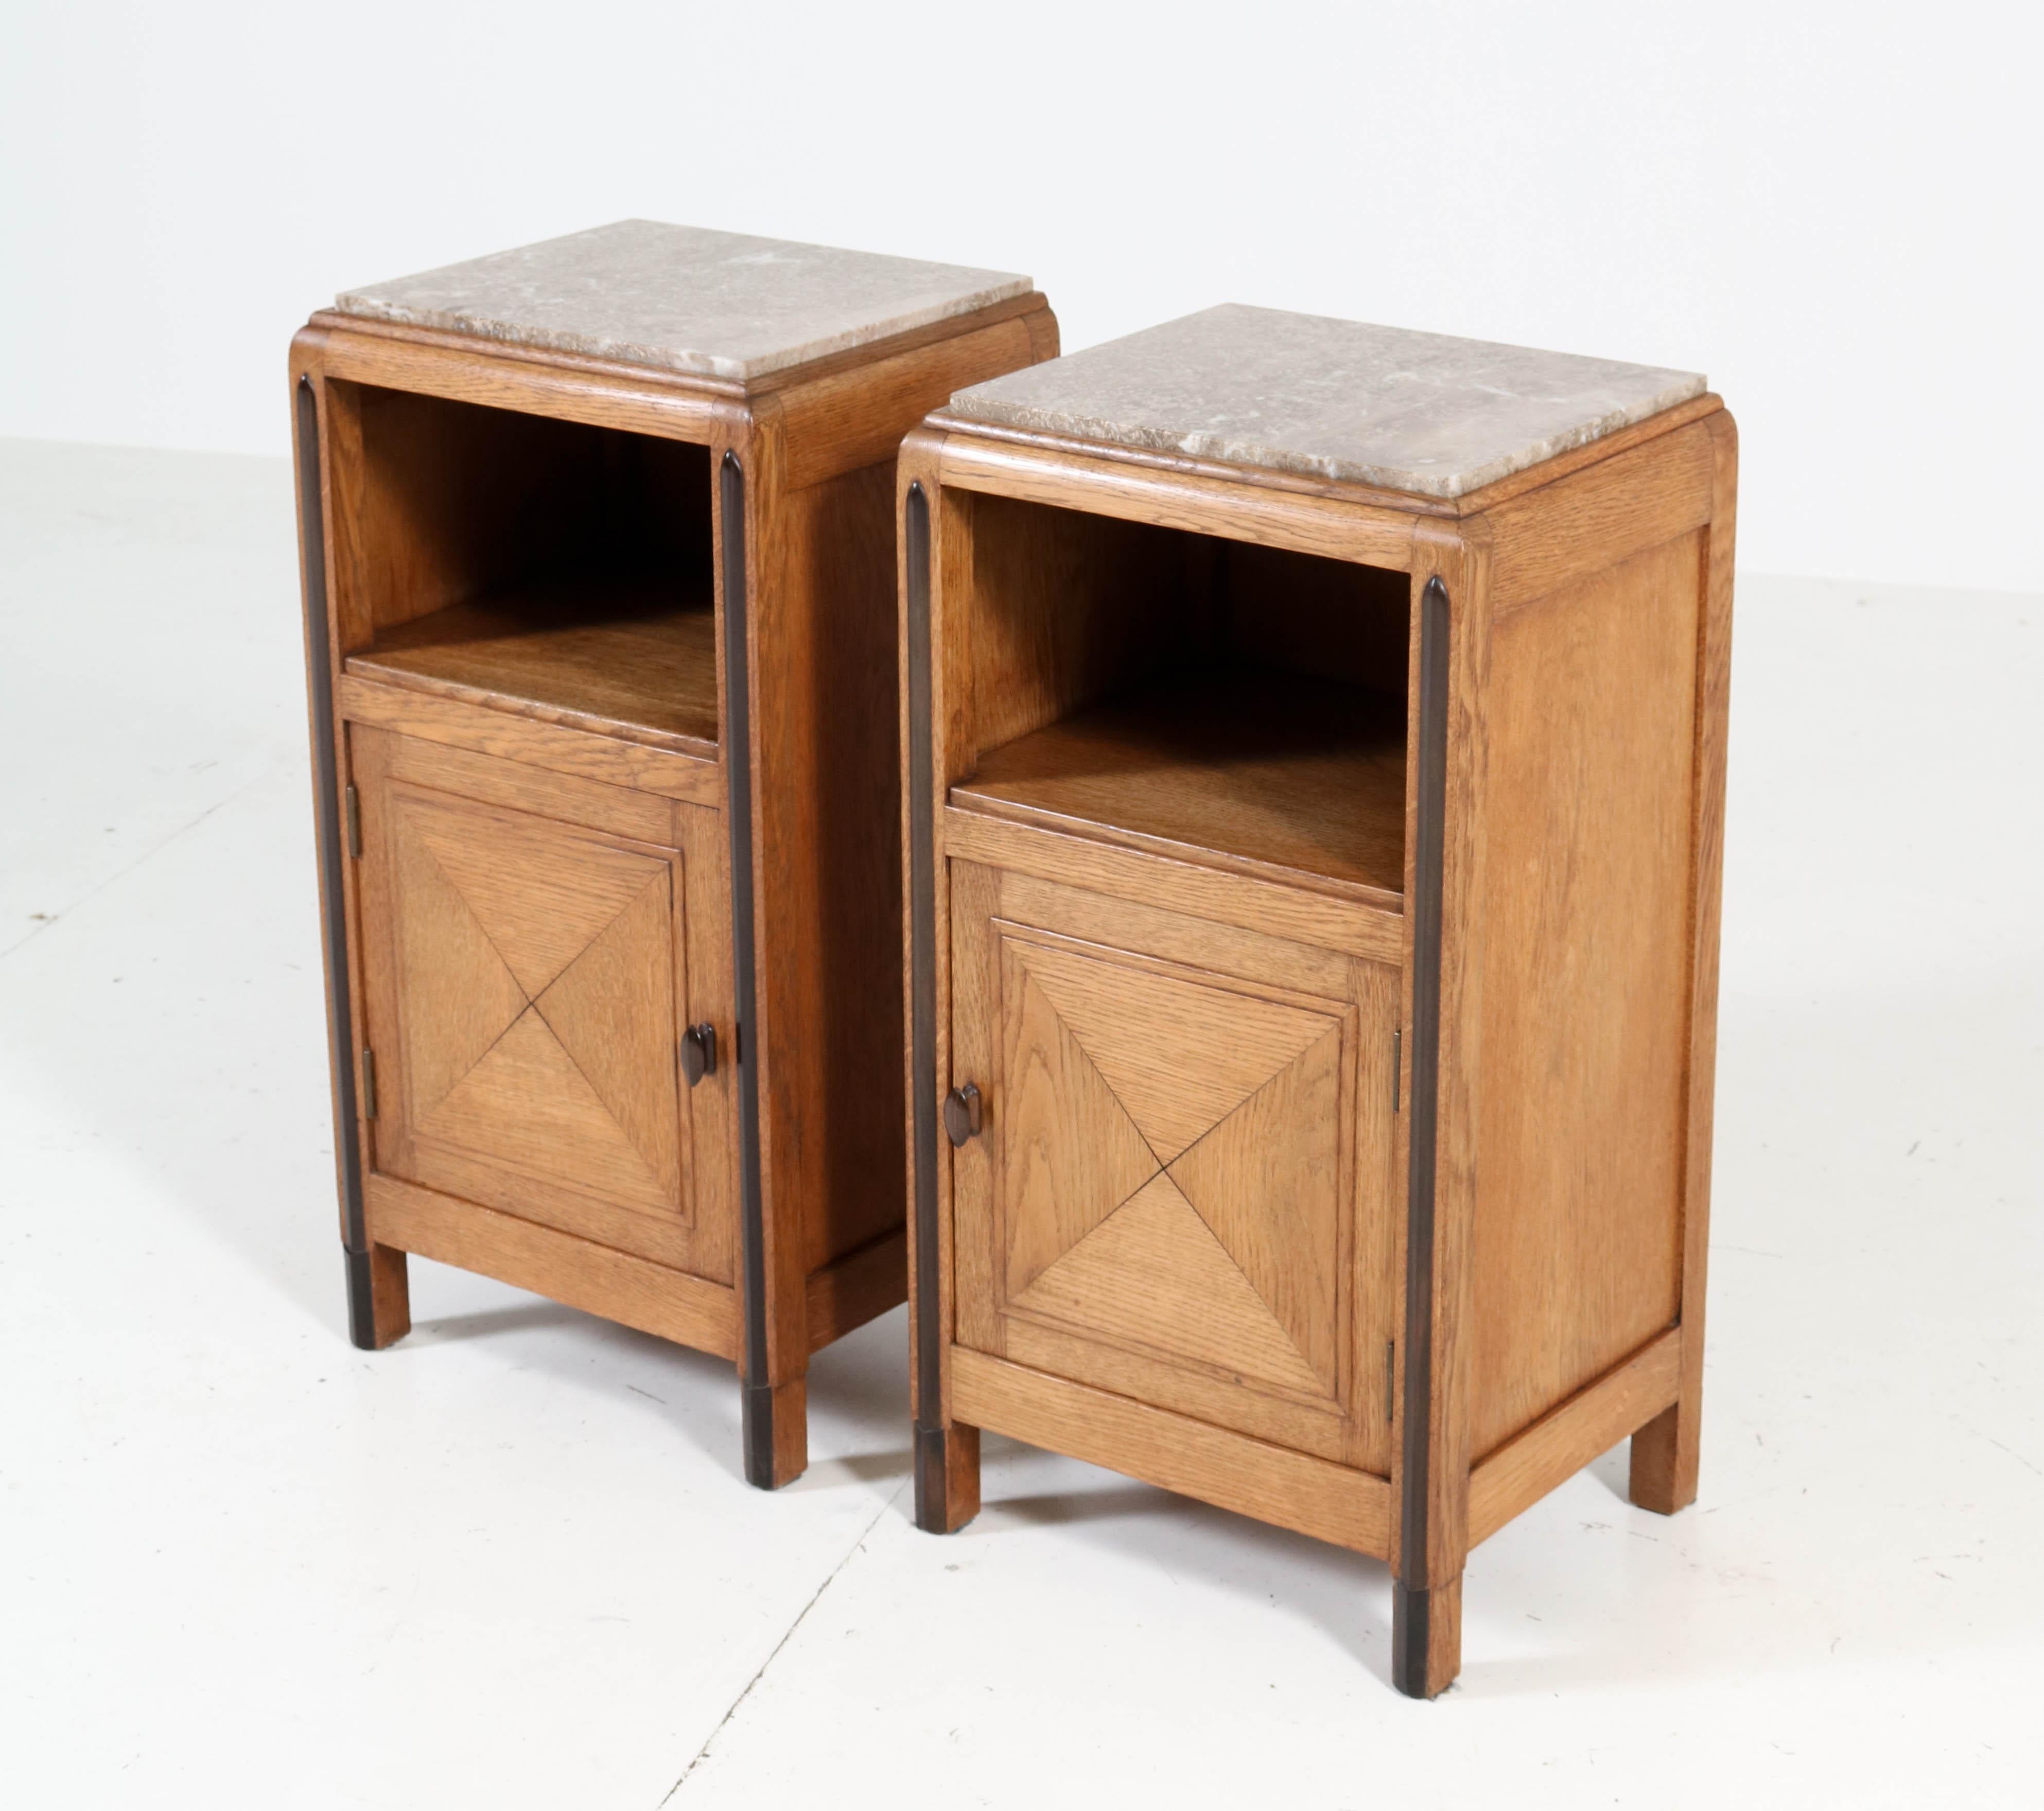 Wonderful and rare pair of Art Deco Amsterdam School nightstands.
Striking Dutch design from the 1920s.
Solid oak with solid ebony Macassar handles and lining.
The pair has the original marble tops and they are in very good shape.
In very good